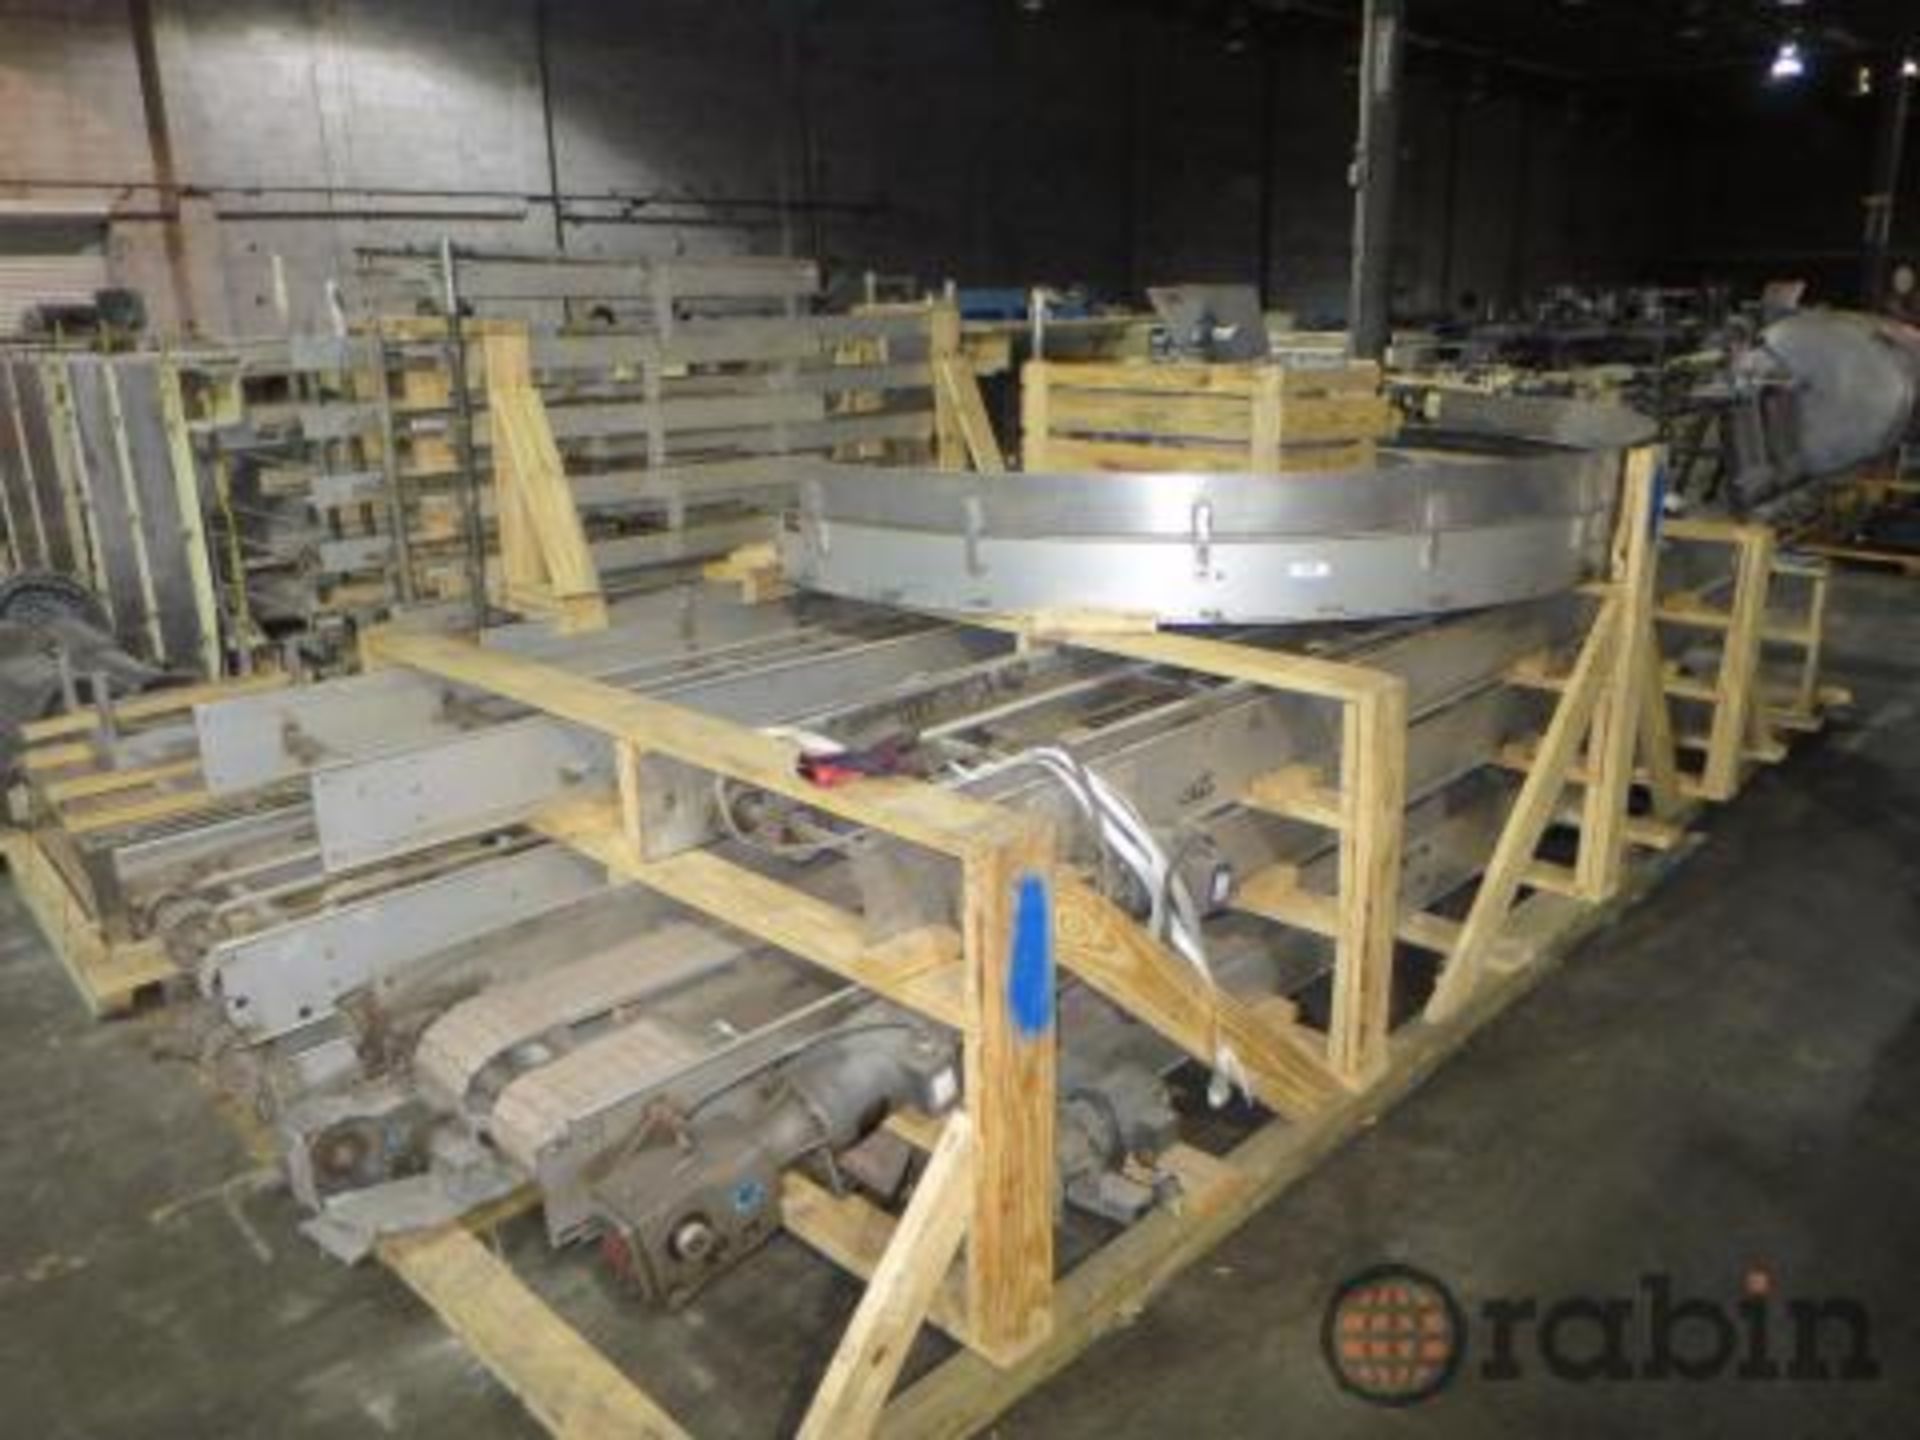 Lot of (7) pan conveyors, approx combined length of 116' [Atlanta]